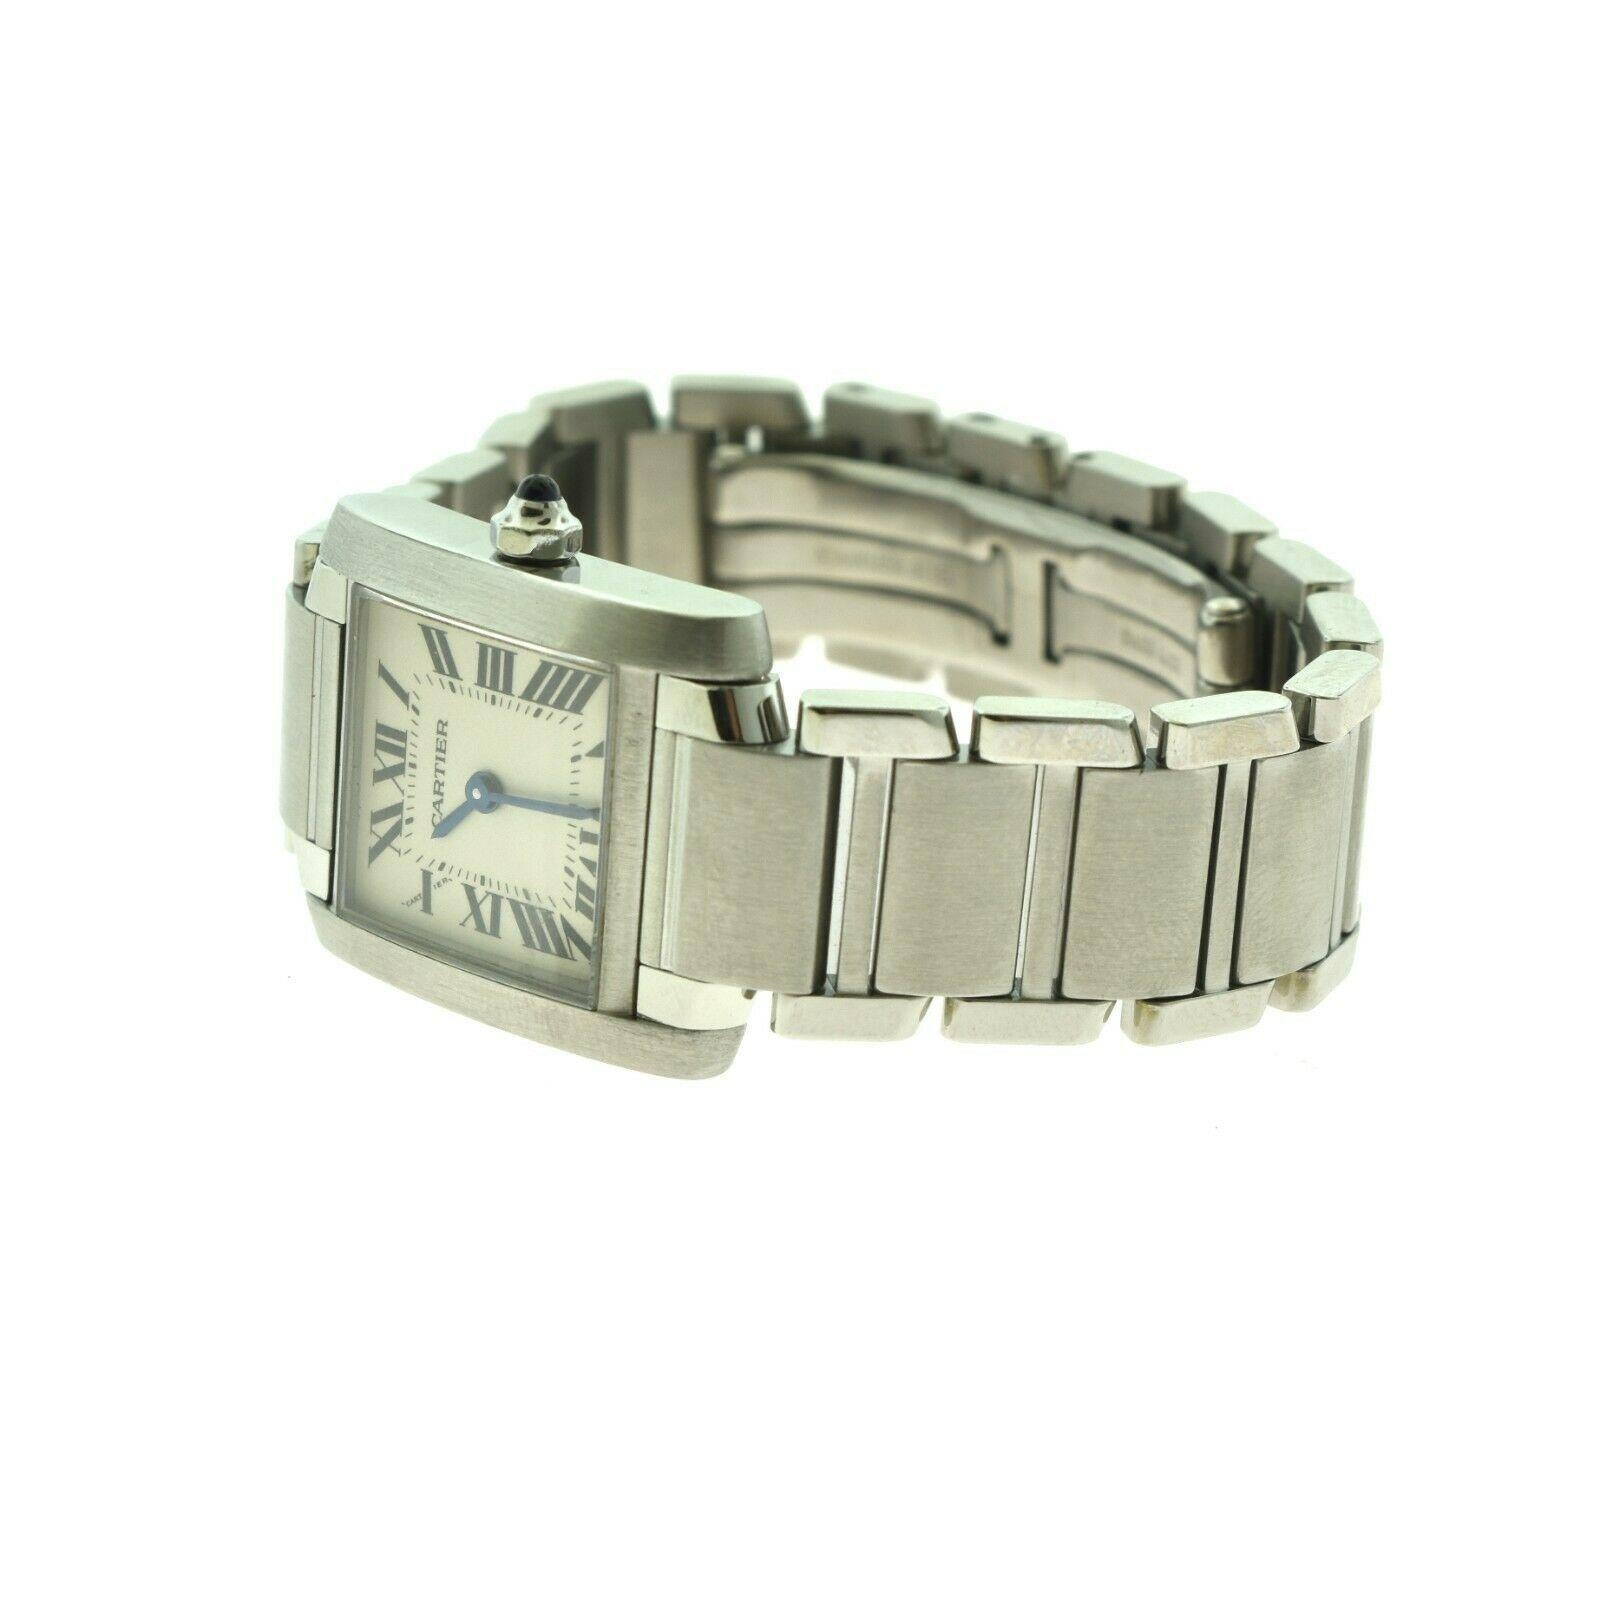 Designer: Cartier

Collection: Tank Francaise

Ref. Number: 2384 

​​​​​​​Movement: Quartz

Case Size: 25 mm x 20 mm

Case Material: Stainless Steel

Movement: Quartz

Hour Markers: Roman Numerals

Bracelet Material: Stainless Steel

Water